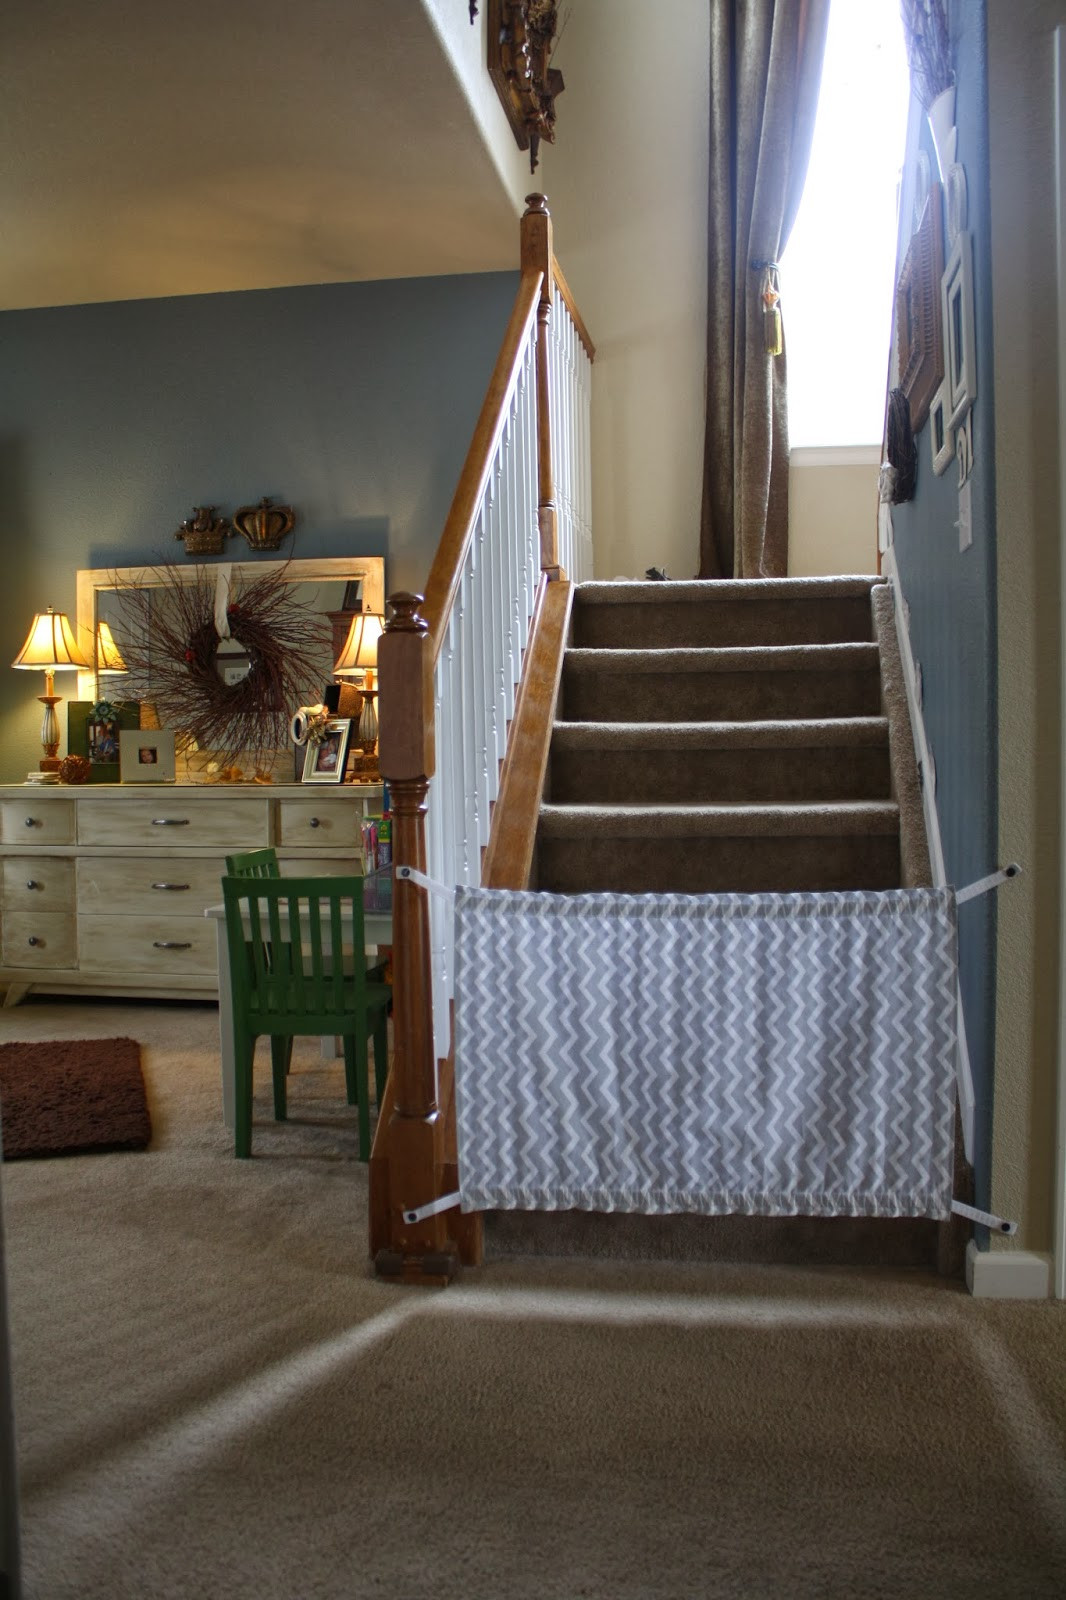 DIY Baby Gate For Stairs
 McCash Family blog Homemade Baby Gate A Tutorial